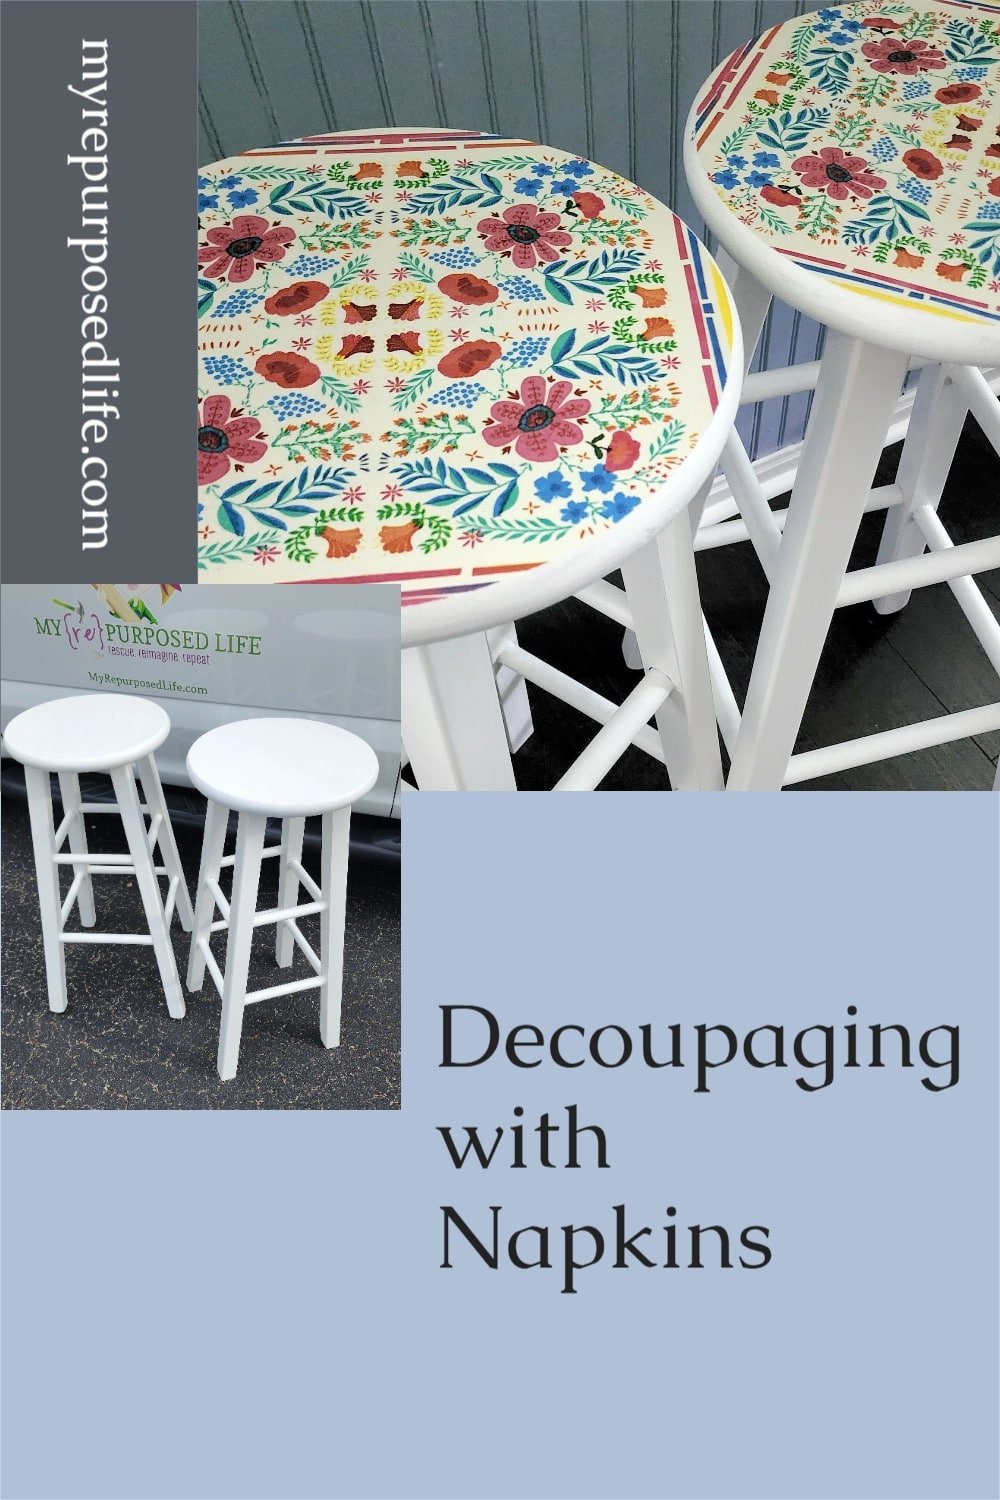 Simple project, decoupage bar stools with napkins. How to get the best look when using mod podge. Decoupage instructions included with tips to help you succeed with your next furniture project. #MyRepurposedLife #upcycle #barstools #decoupage #modpodge via @repurposedlife